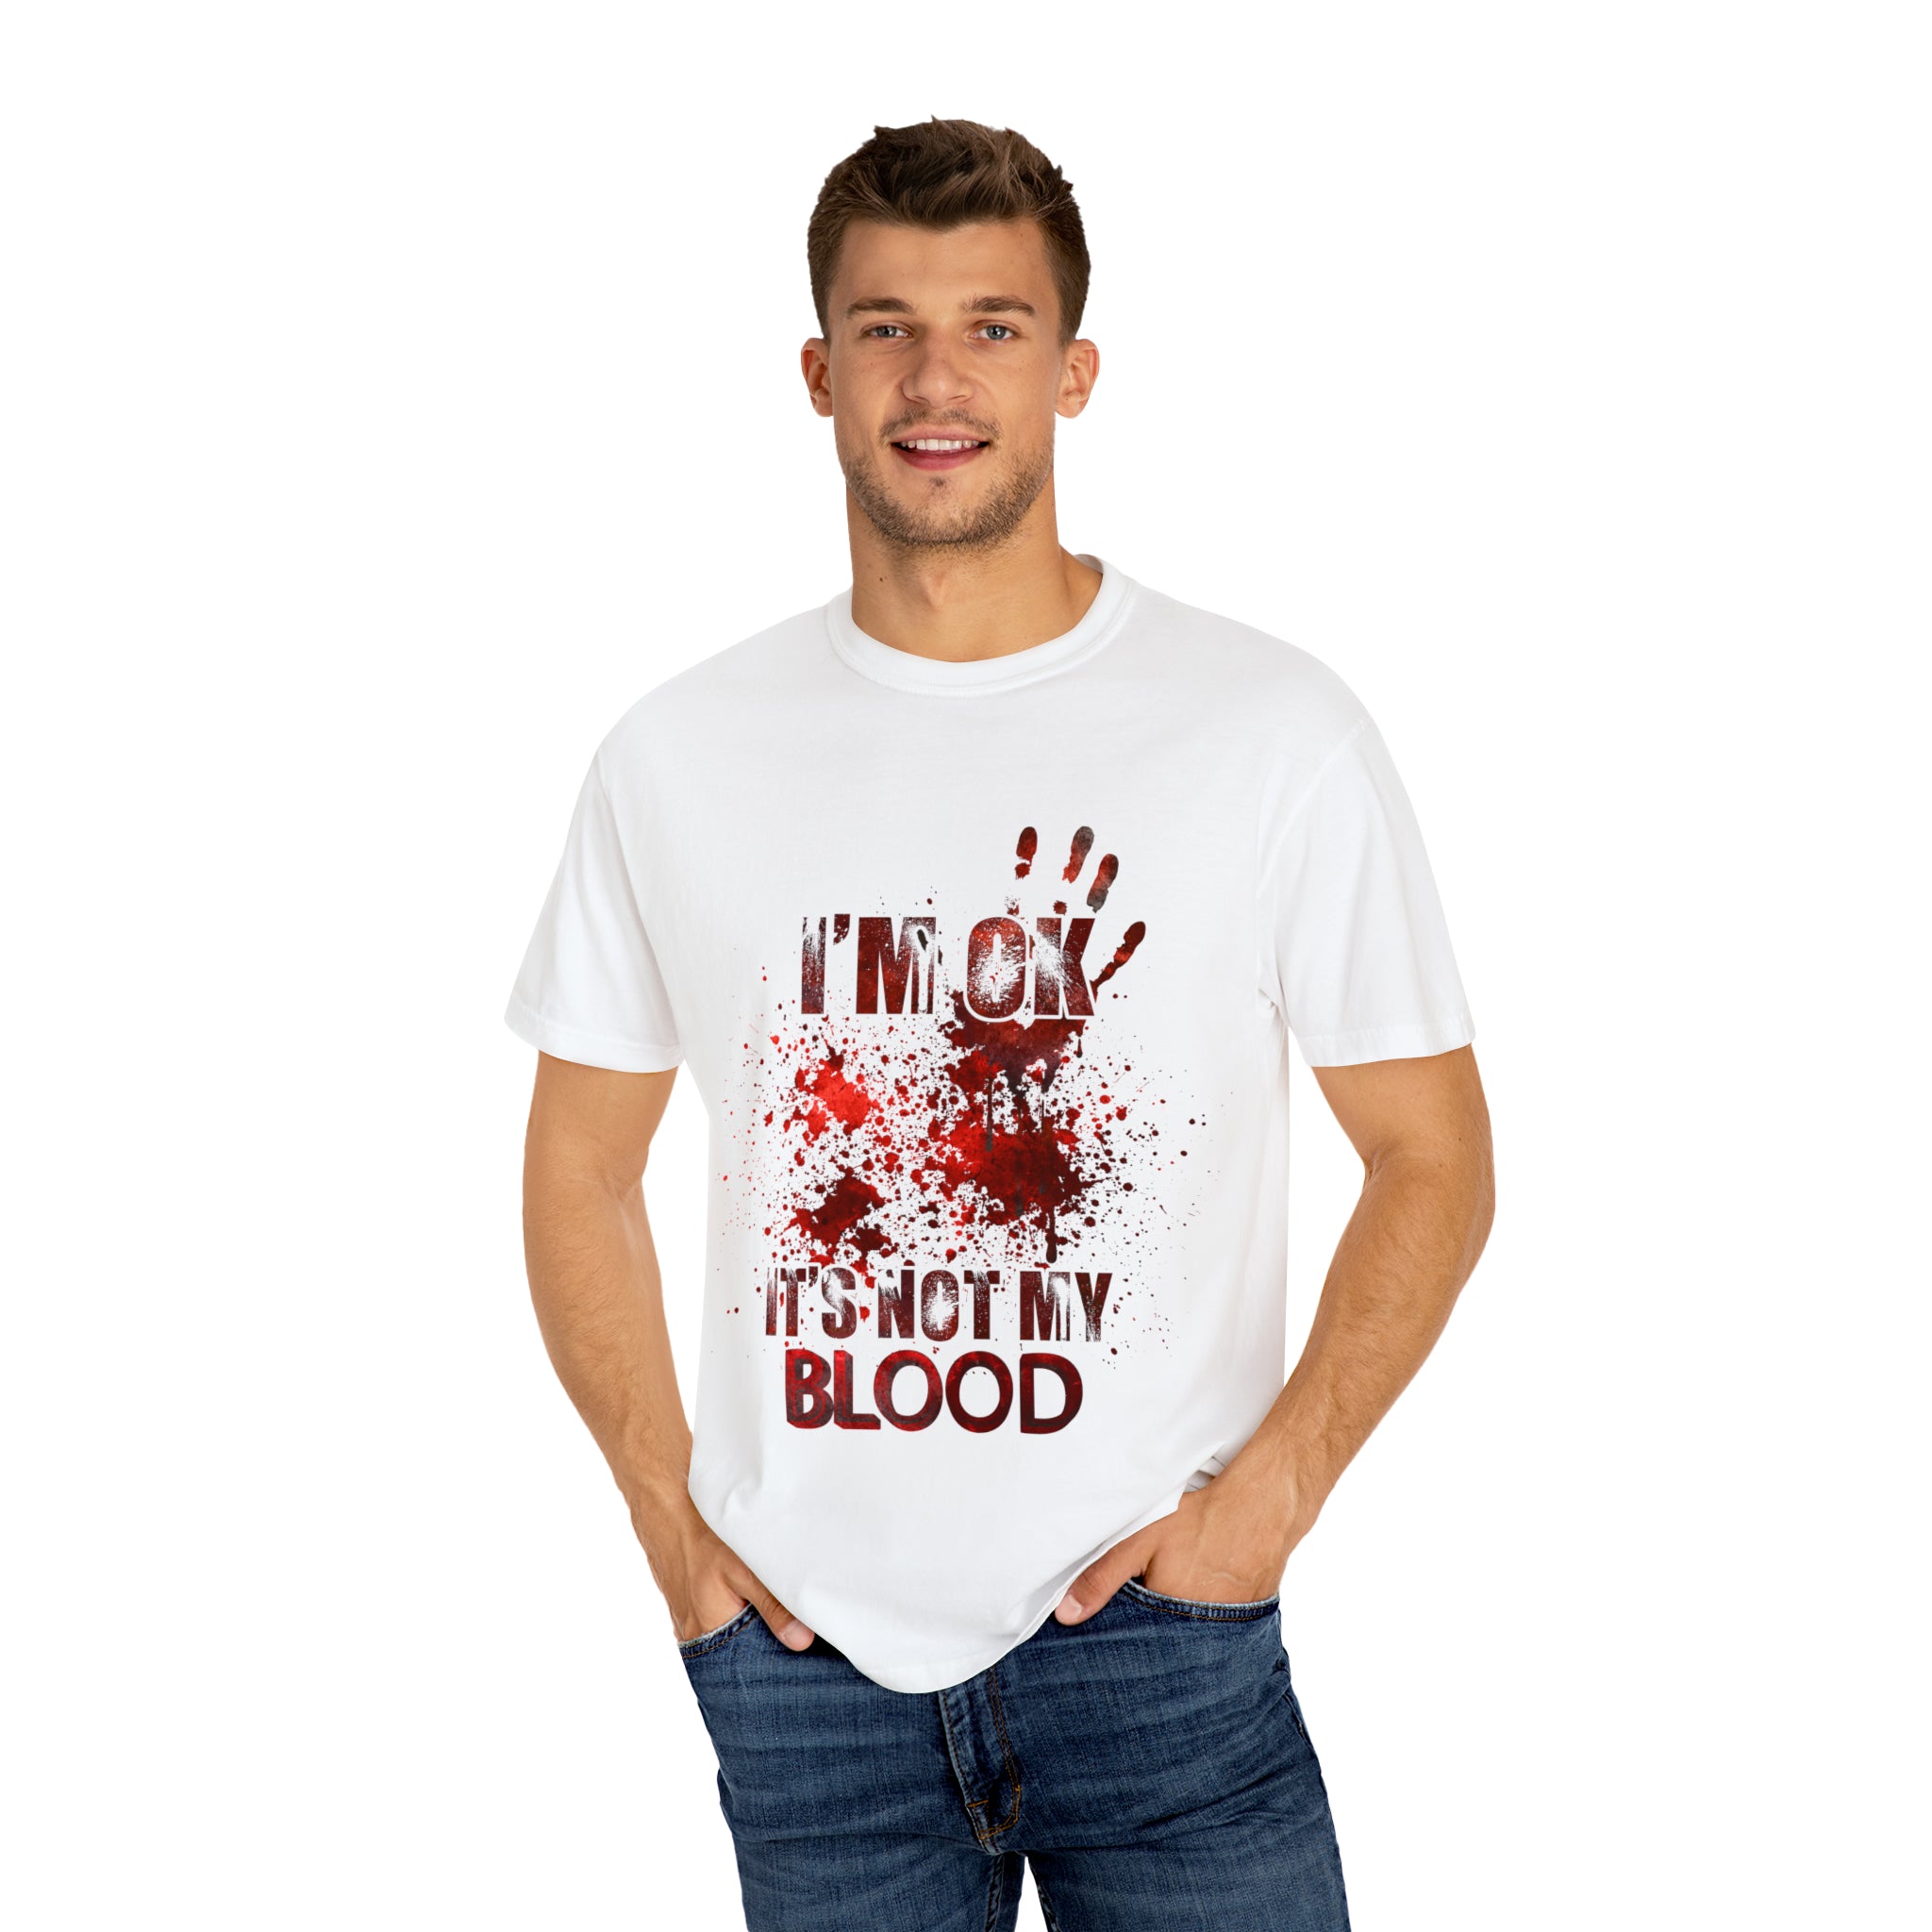 The image features a unisex garment-dyed t-shirt displaying a humorous scene of a zombie fight with the text "I'm OK..." splashed across in bold, eye-catching letters. The design emphasizes both the comedy and the horror elements, perfectly balancing the two for fans of both genres. The shirt's quality fabric and faded color palette enhance the vintage, laid-back vibe, making it an essential addition to any casual wardrobe.